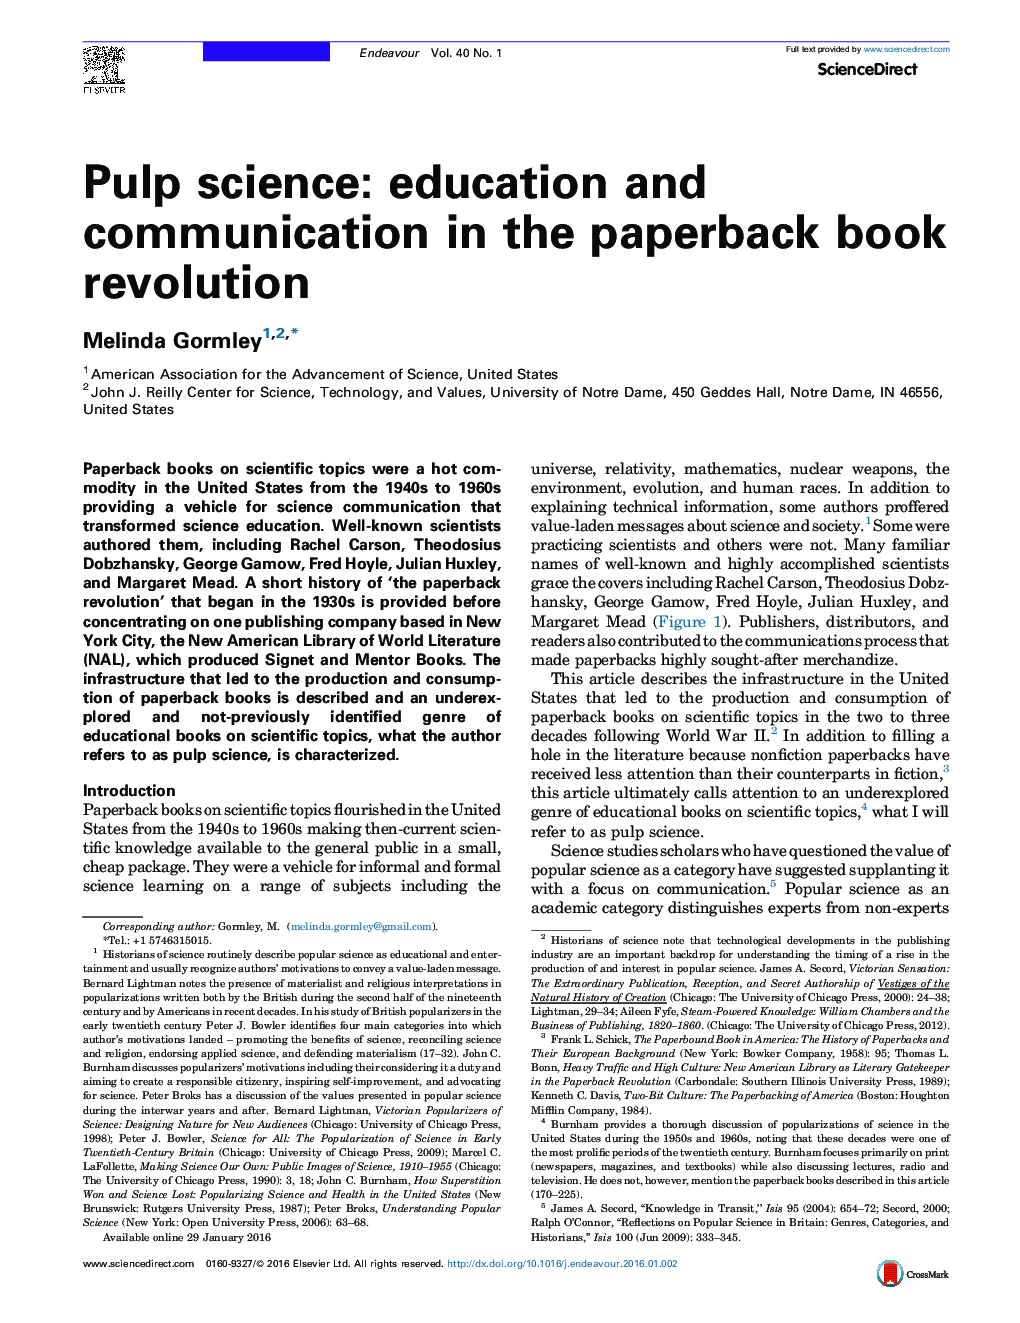 Pulp science: education and communication in the paperback book revolution